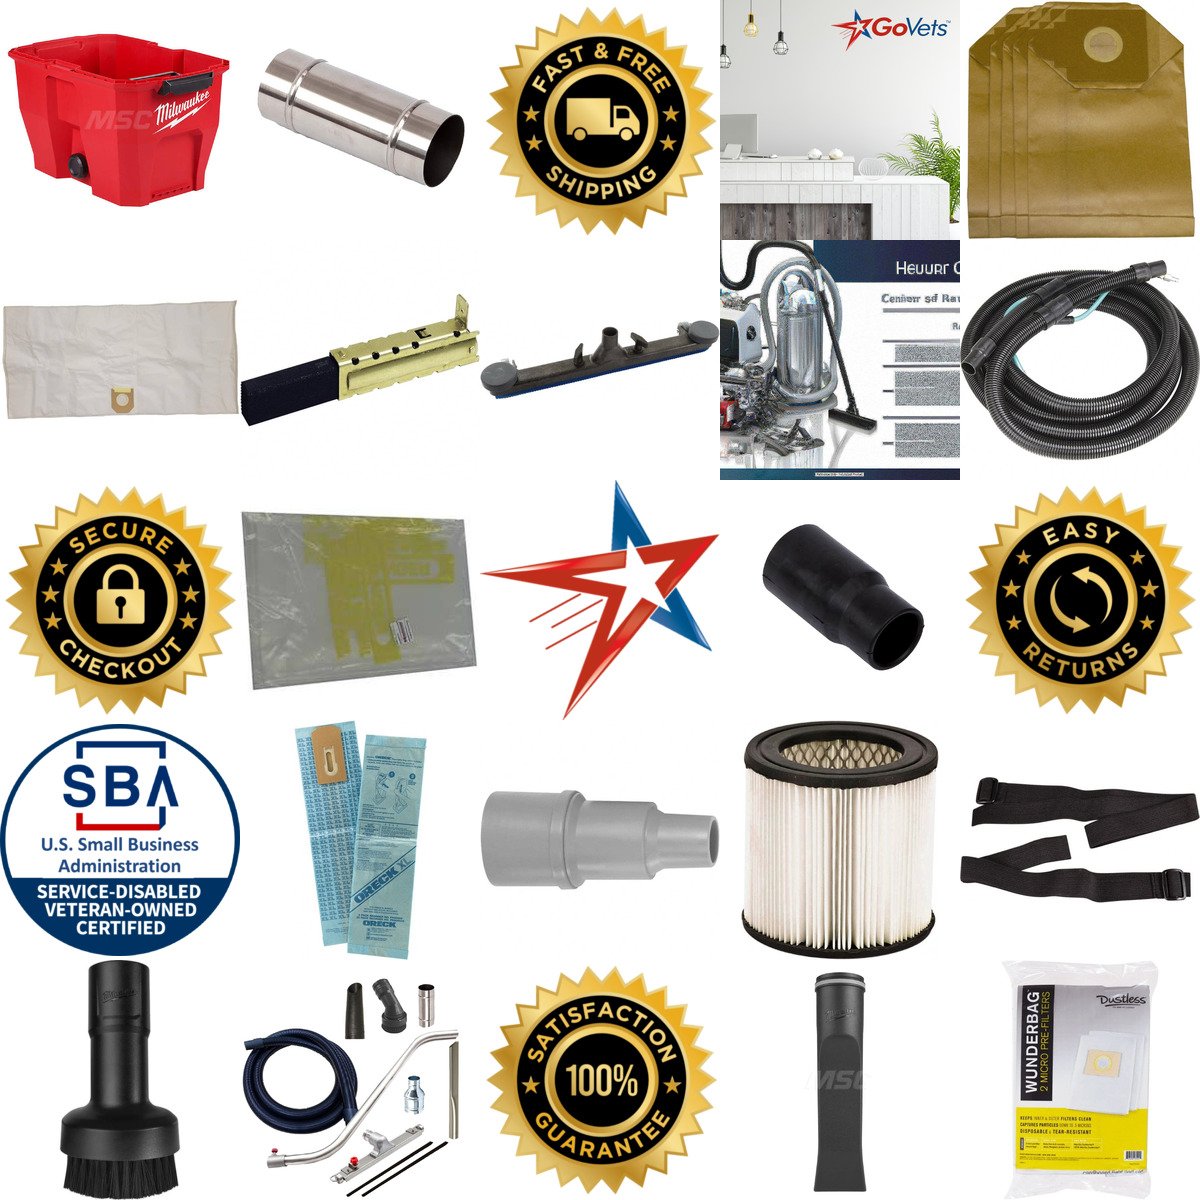 A selection of Vacuum Cleaner Attachments and Accessories products on GoVets